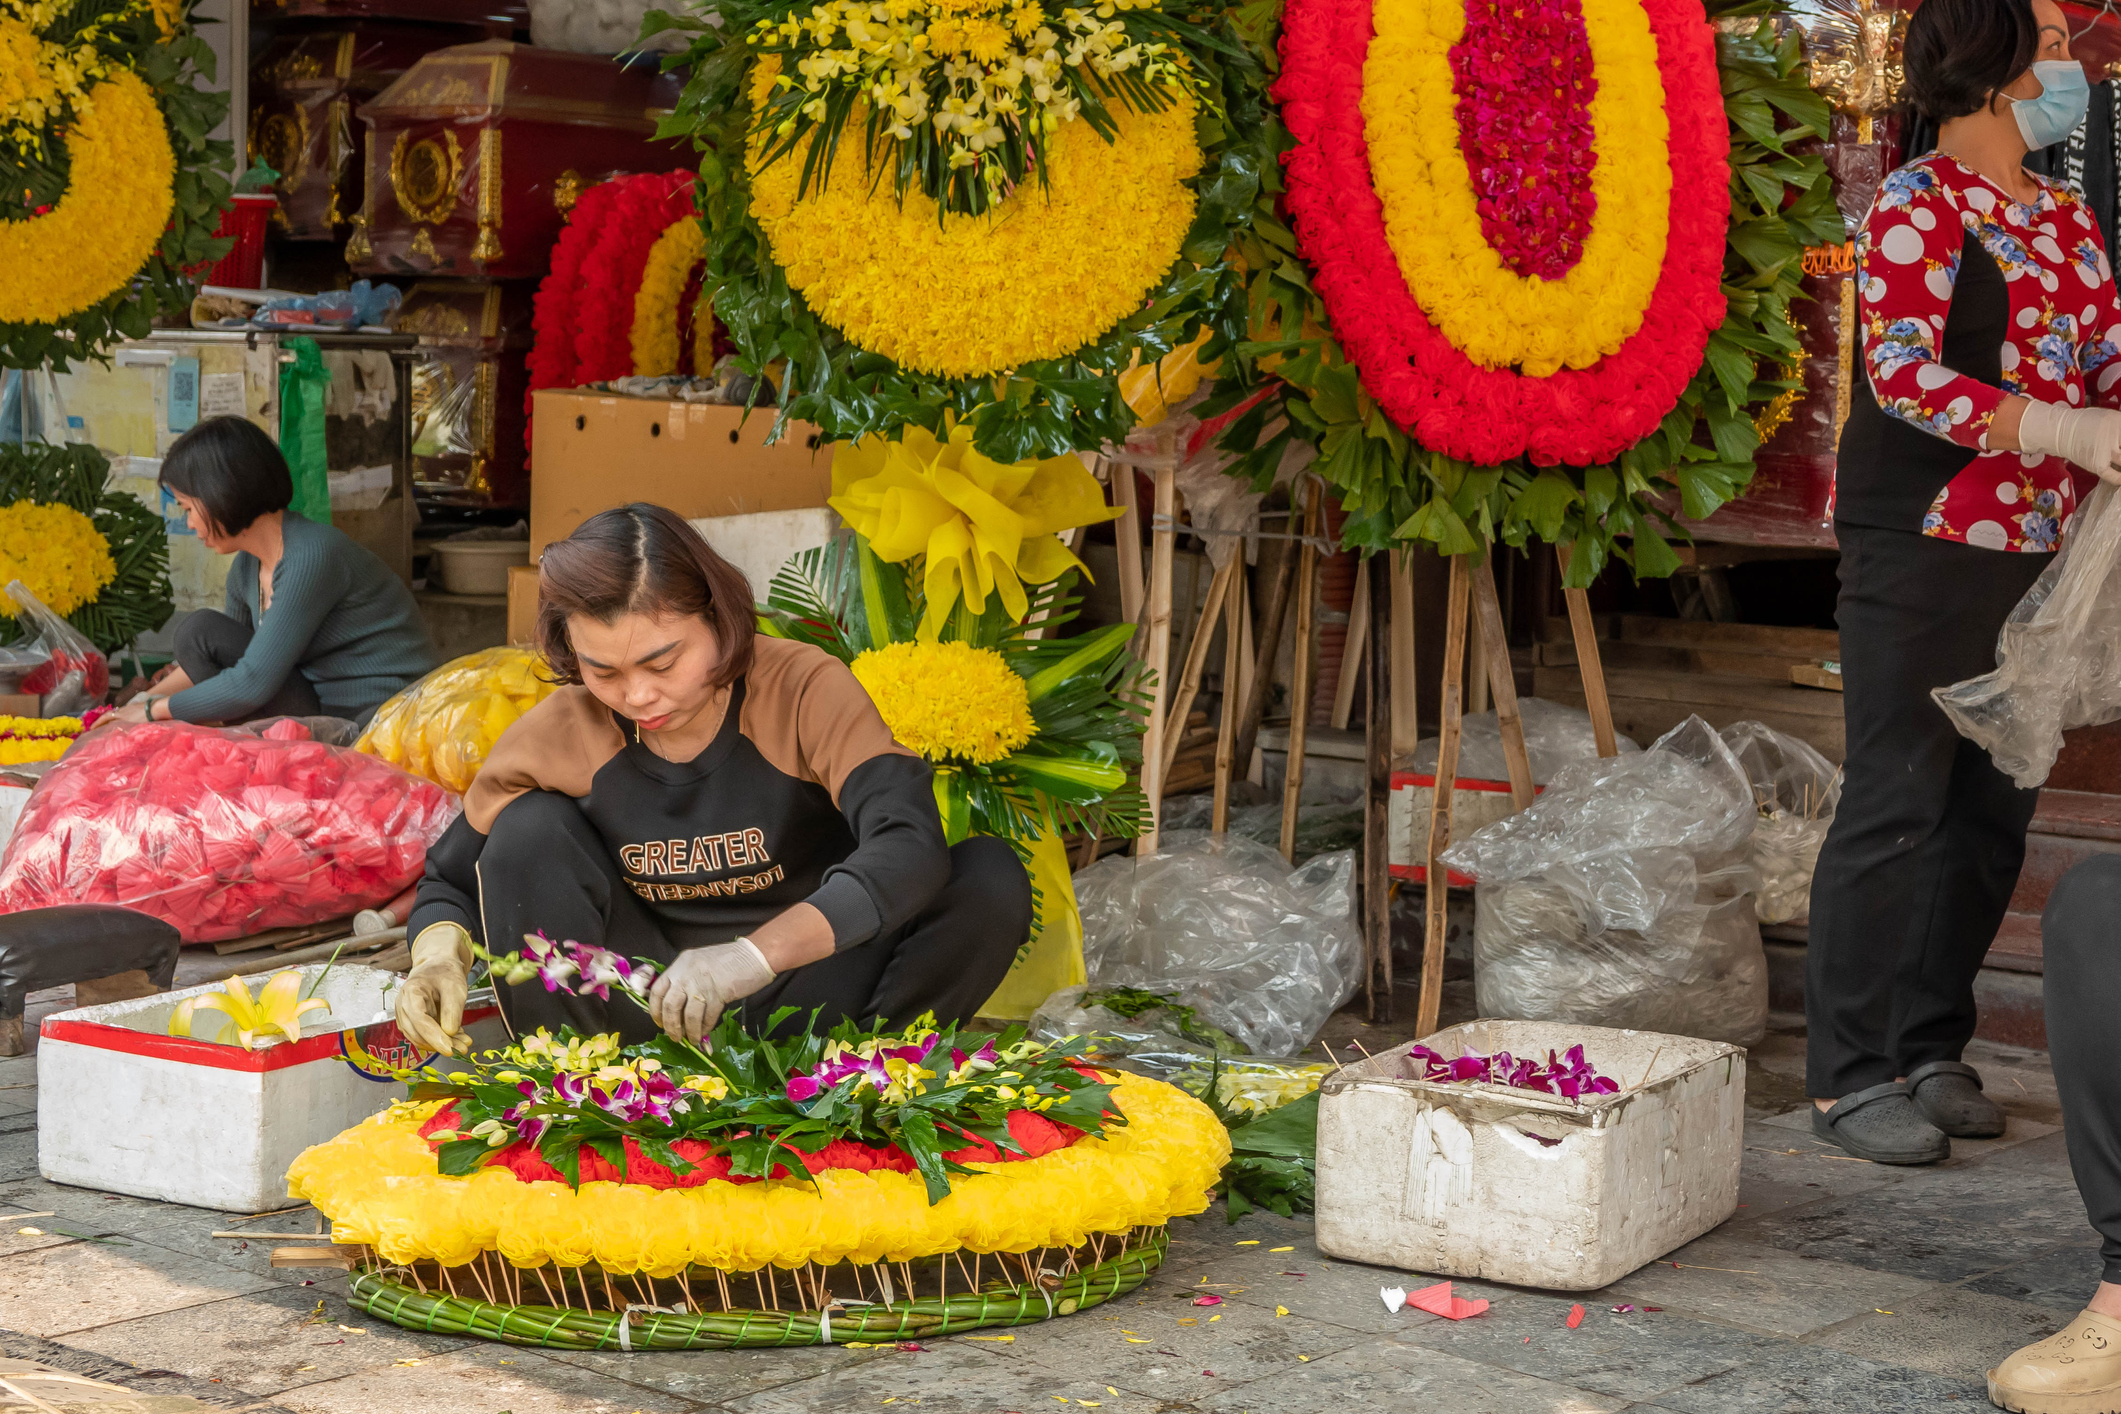 A woman prepares a wreath on the street in Hanoi for an upcoming funeral. Cremation in Bali.